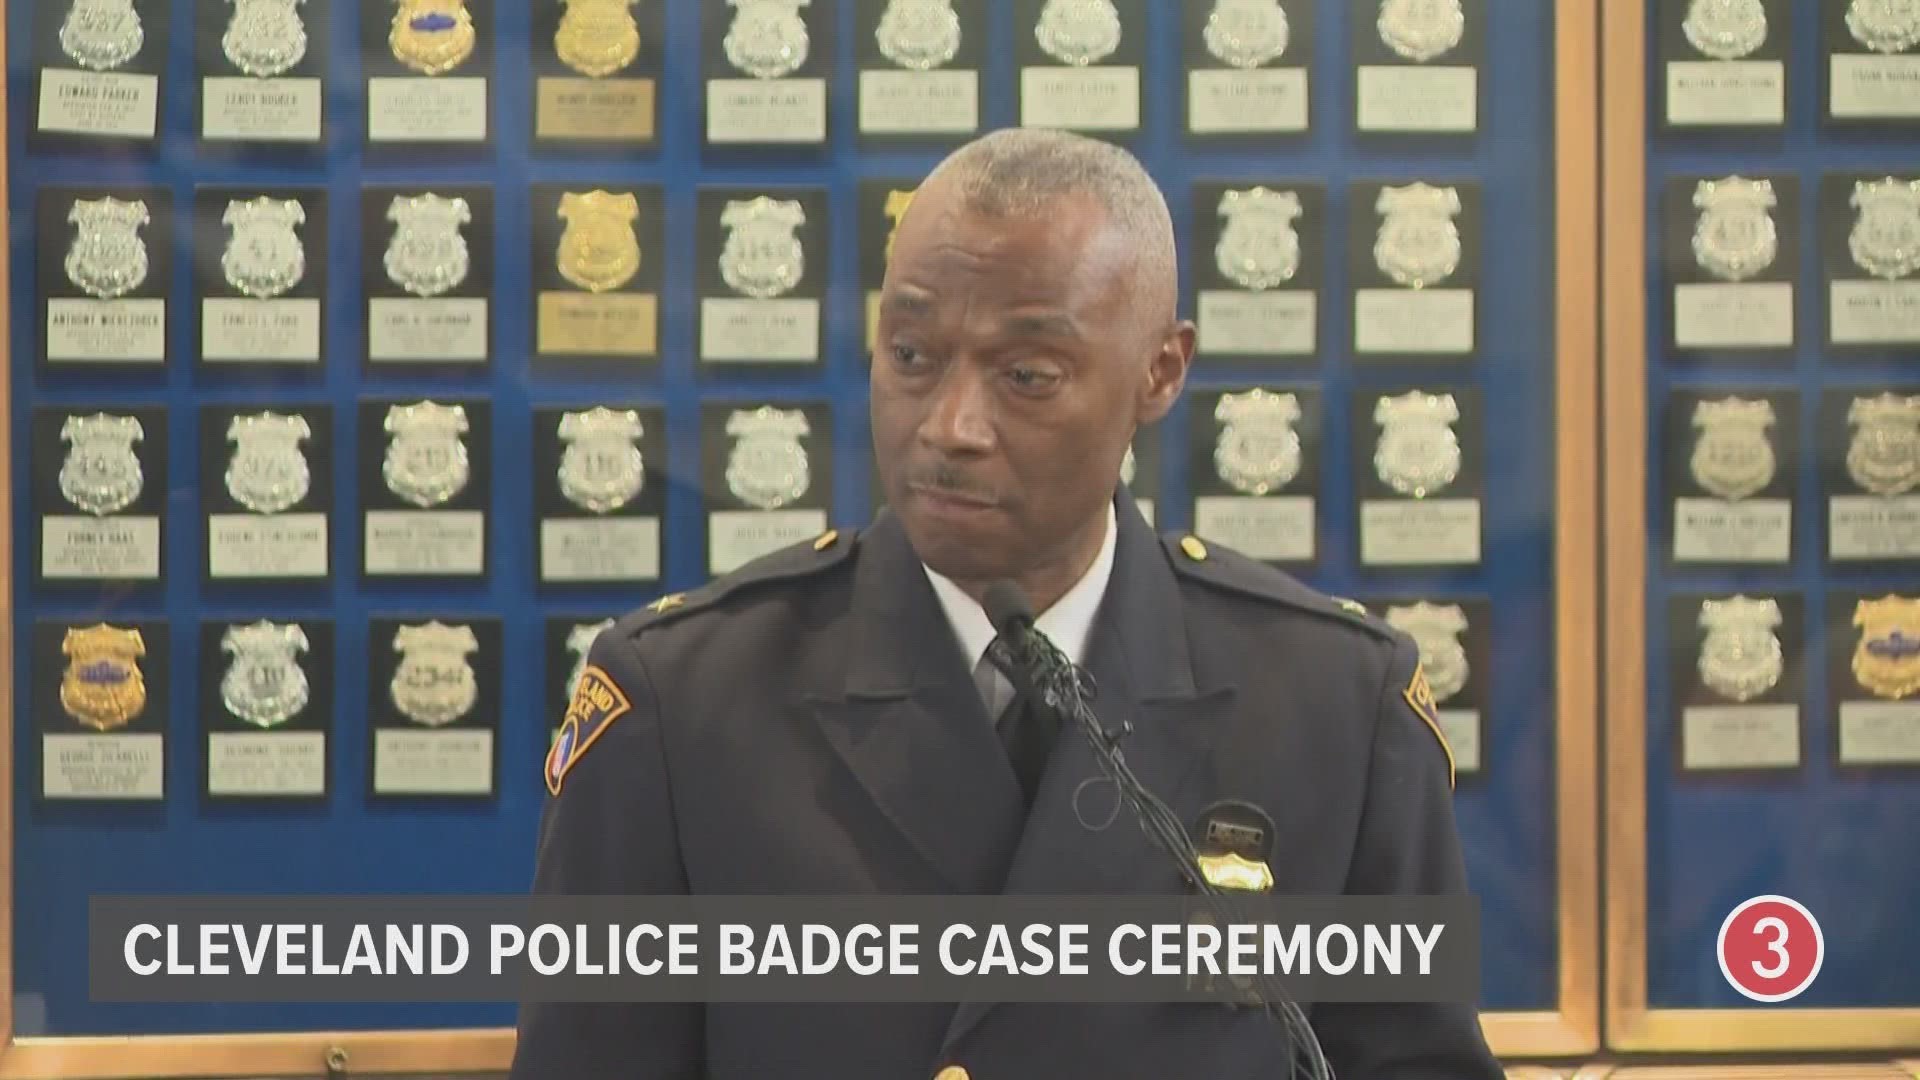 Cleveland Police Chief Wayne Drummond speaks at the 2023 badge case ceremony.